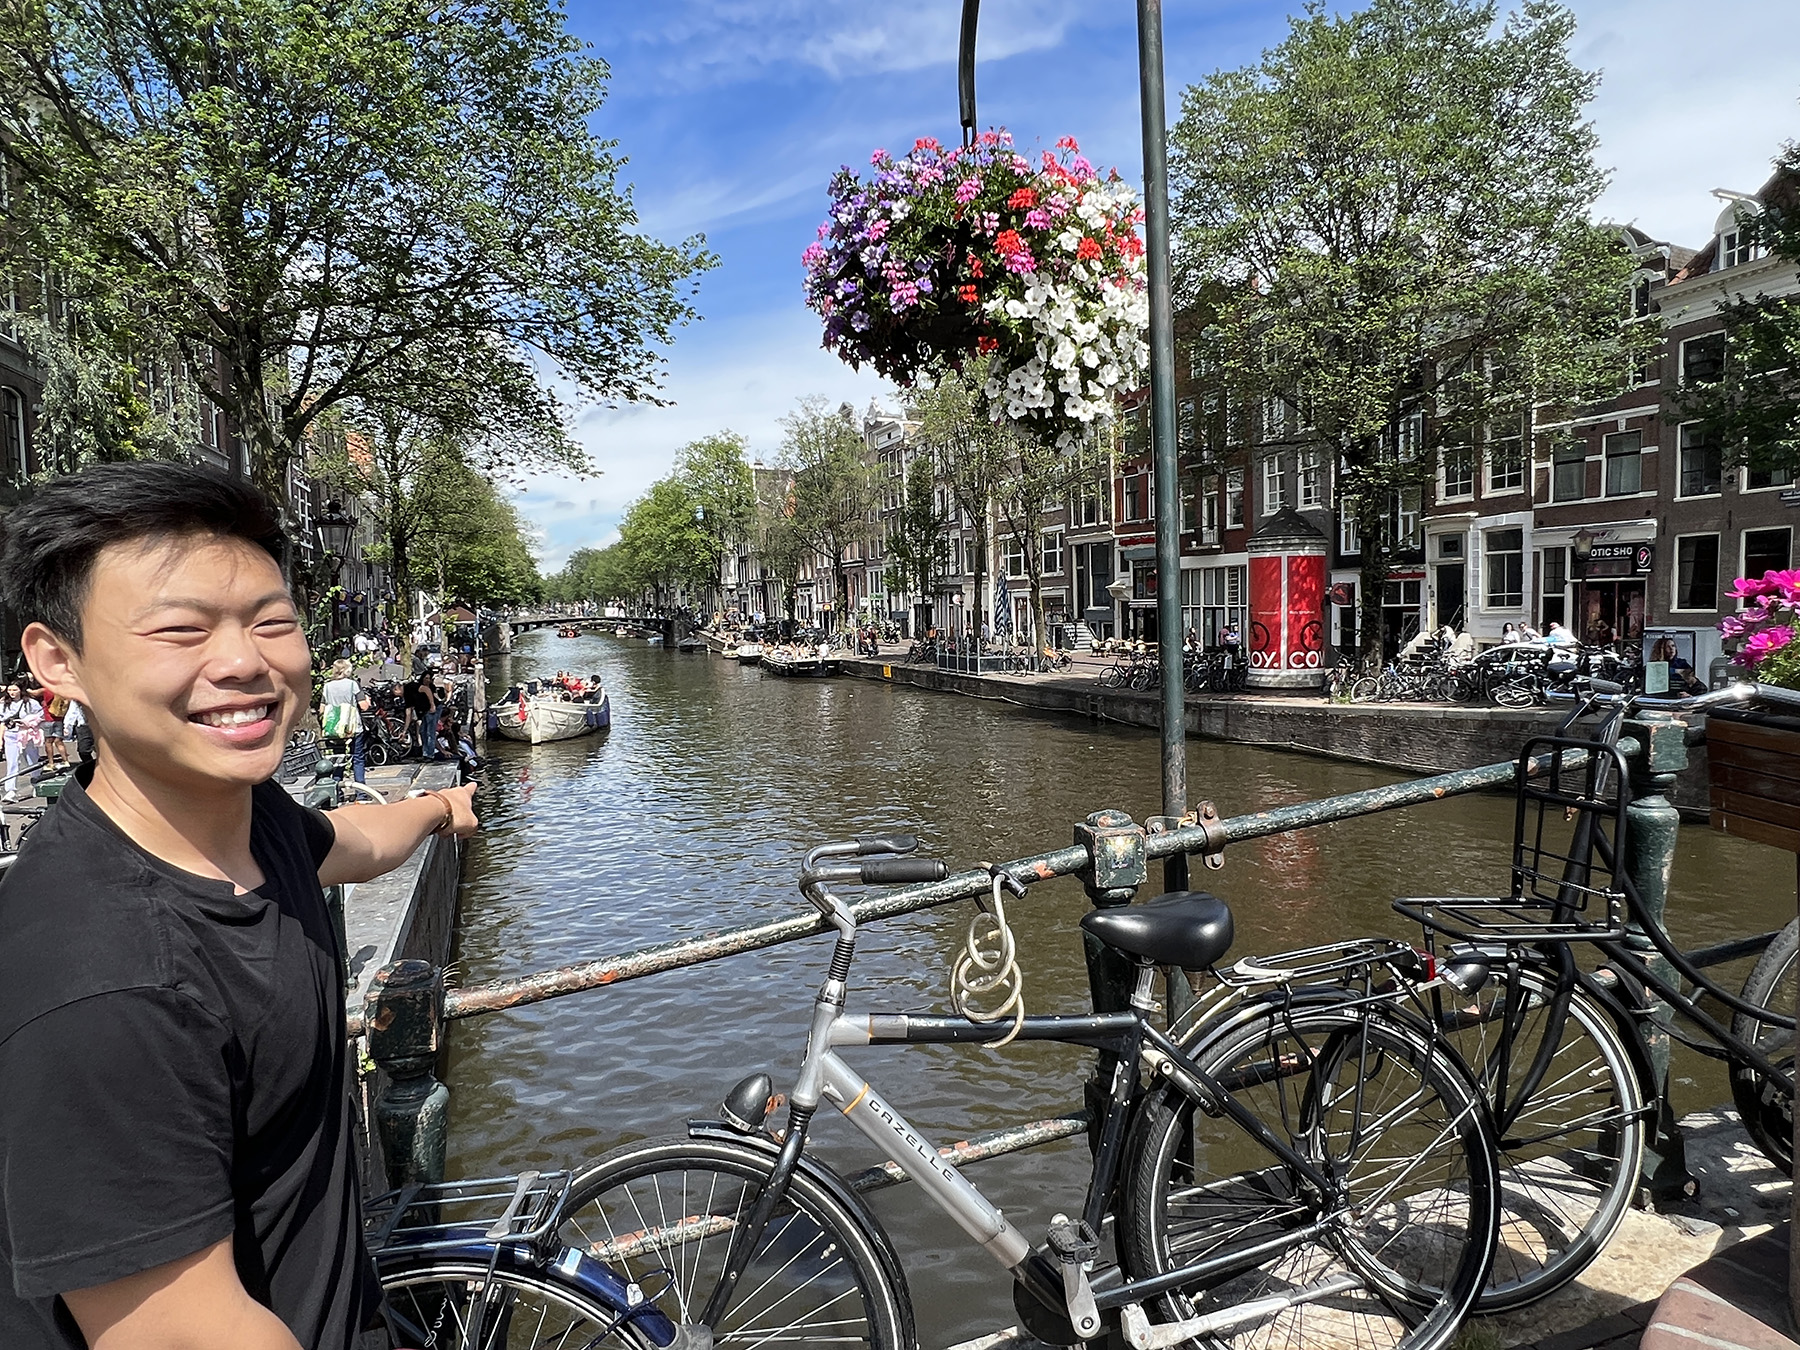 The photograph shows civil engineer Paul Lee pointing to a canal in Amsterdam, surrounded by bicycles. 